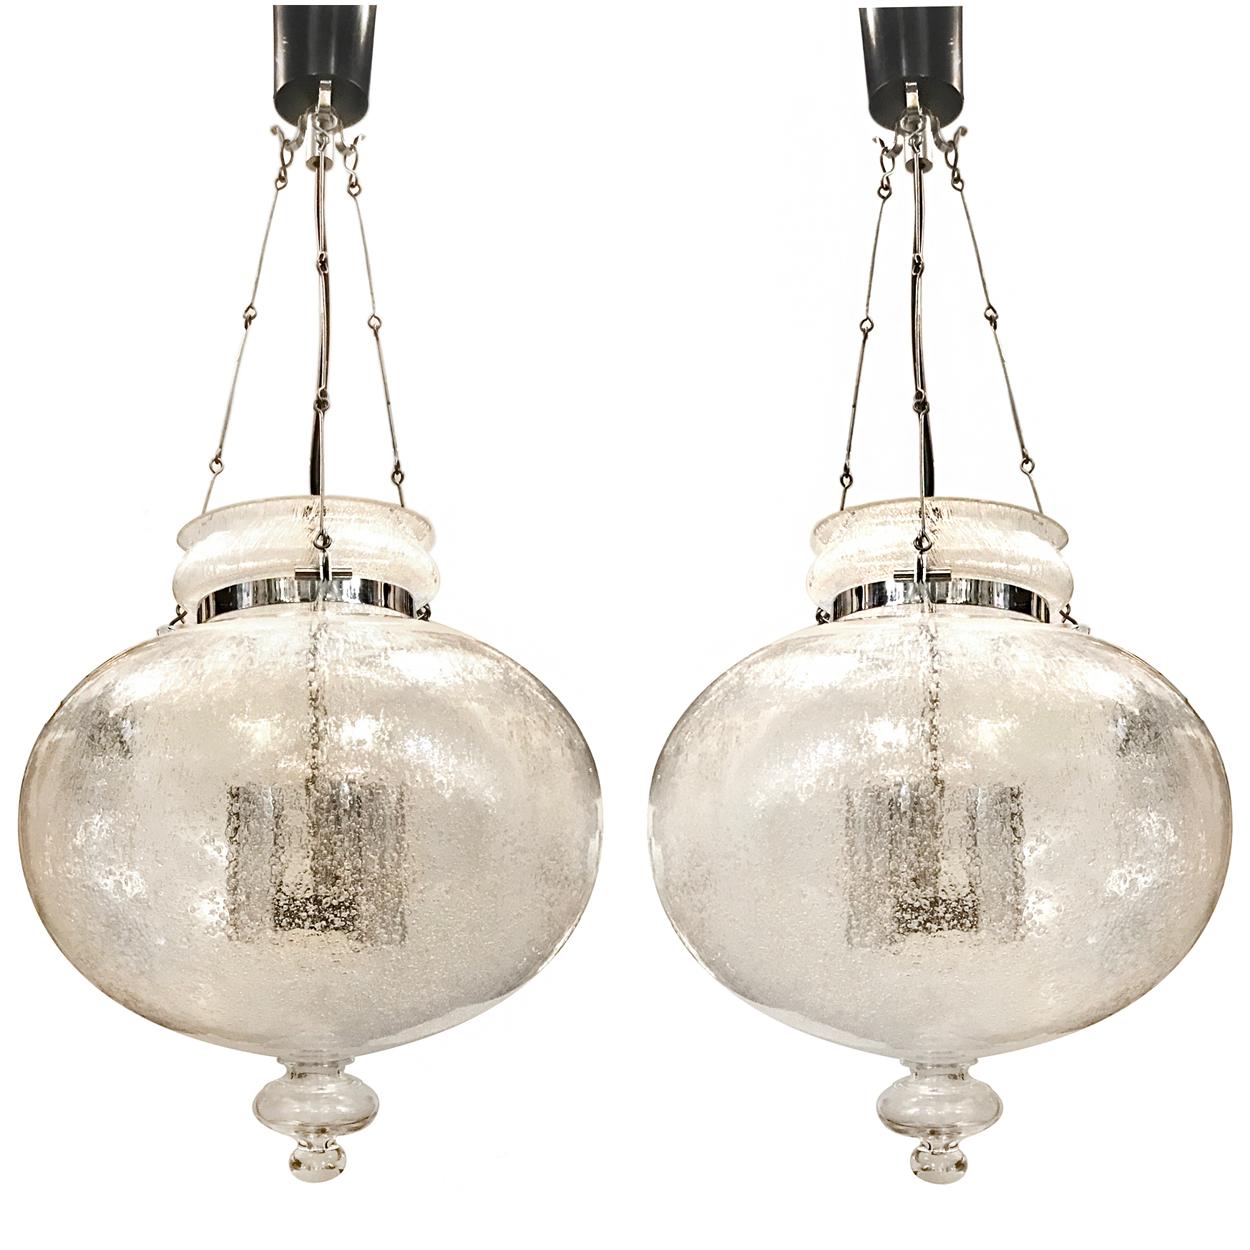 A pair of circa 1960's Italian blown glass lantern with nickel plated body. Sold individually.

Measurements:
Current drop: 29.5